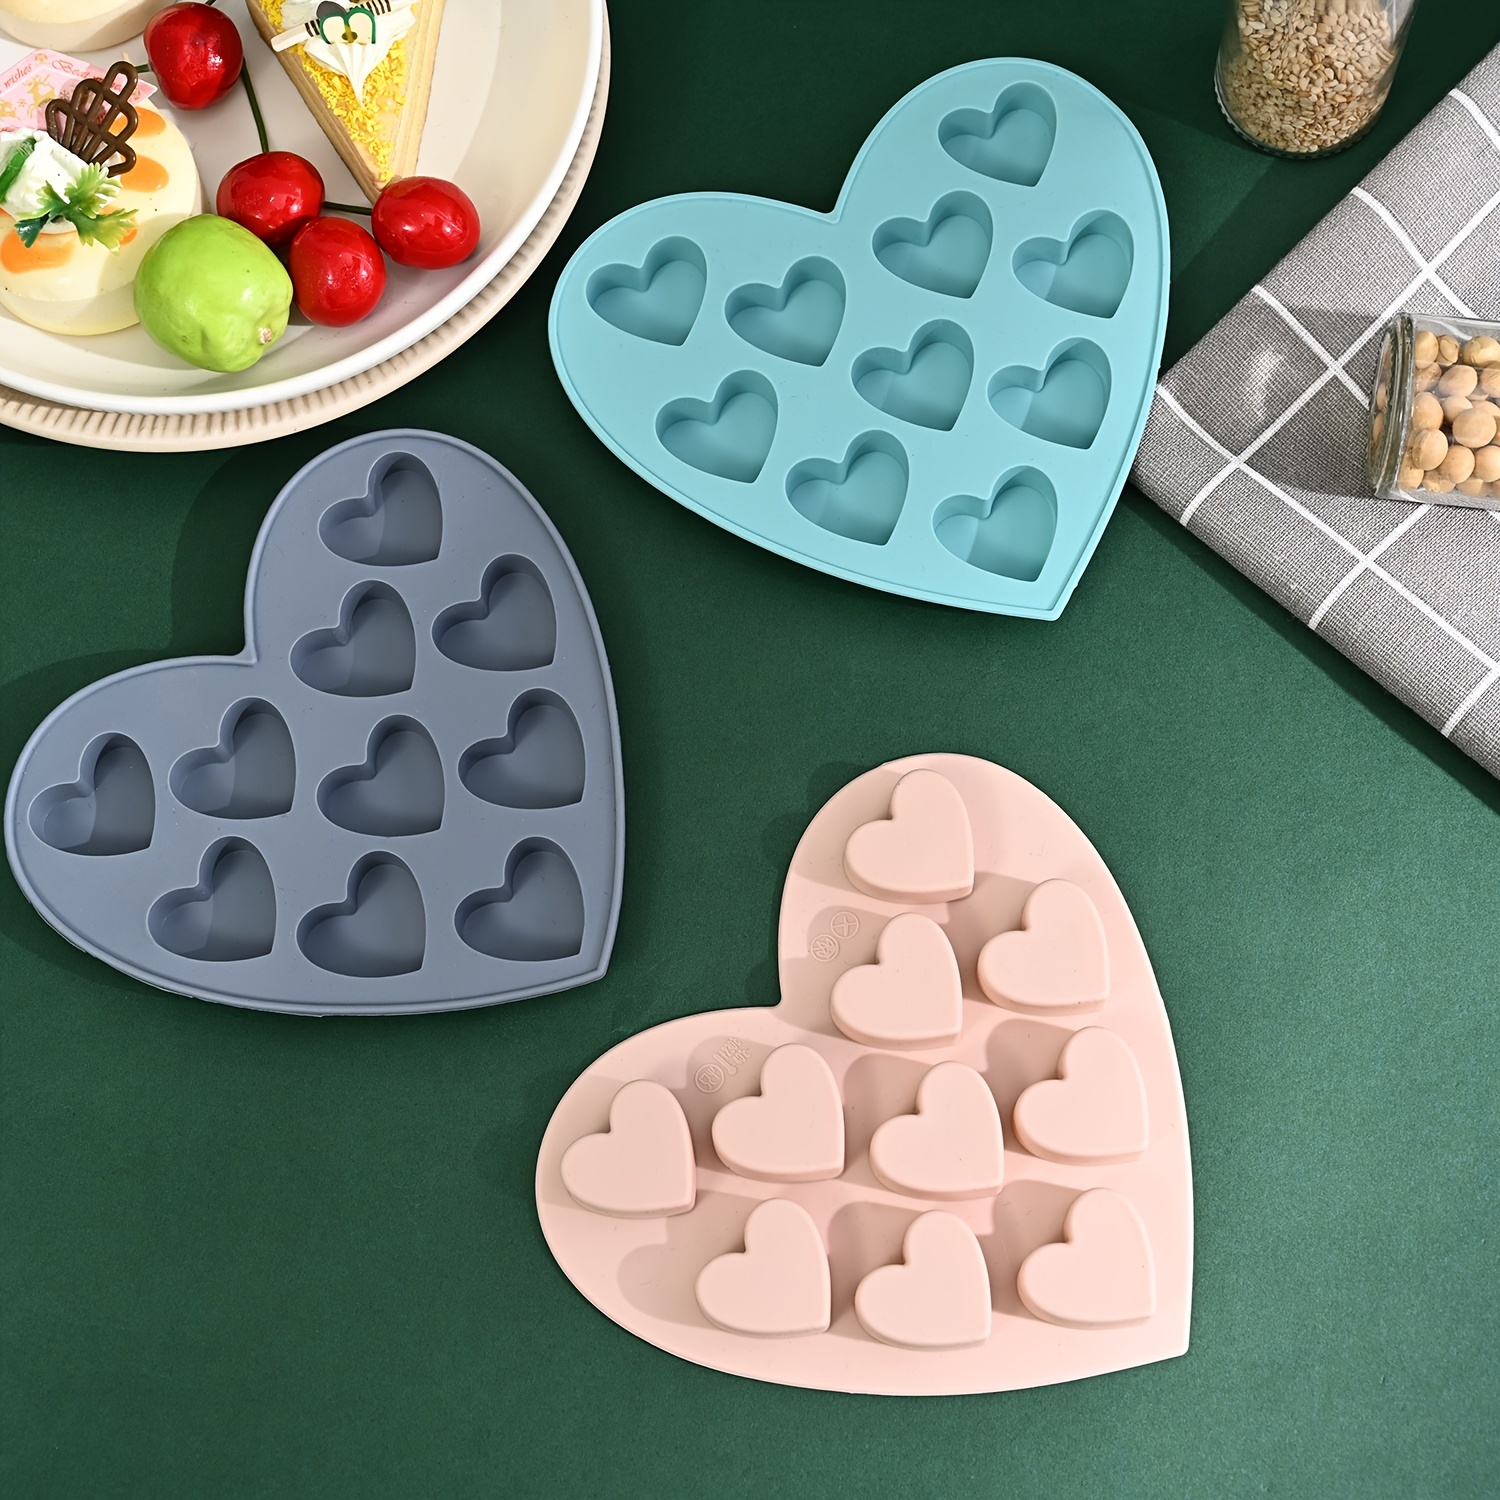 Silicone Baking Pan For Pastry 3d Mini Heart Cake Candle Chocoalte